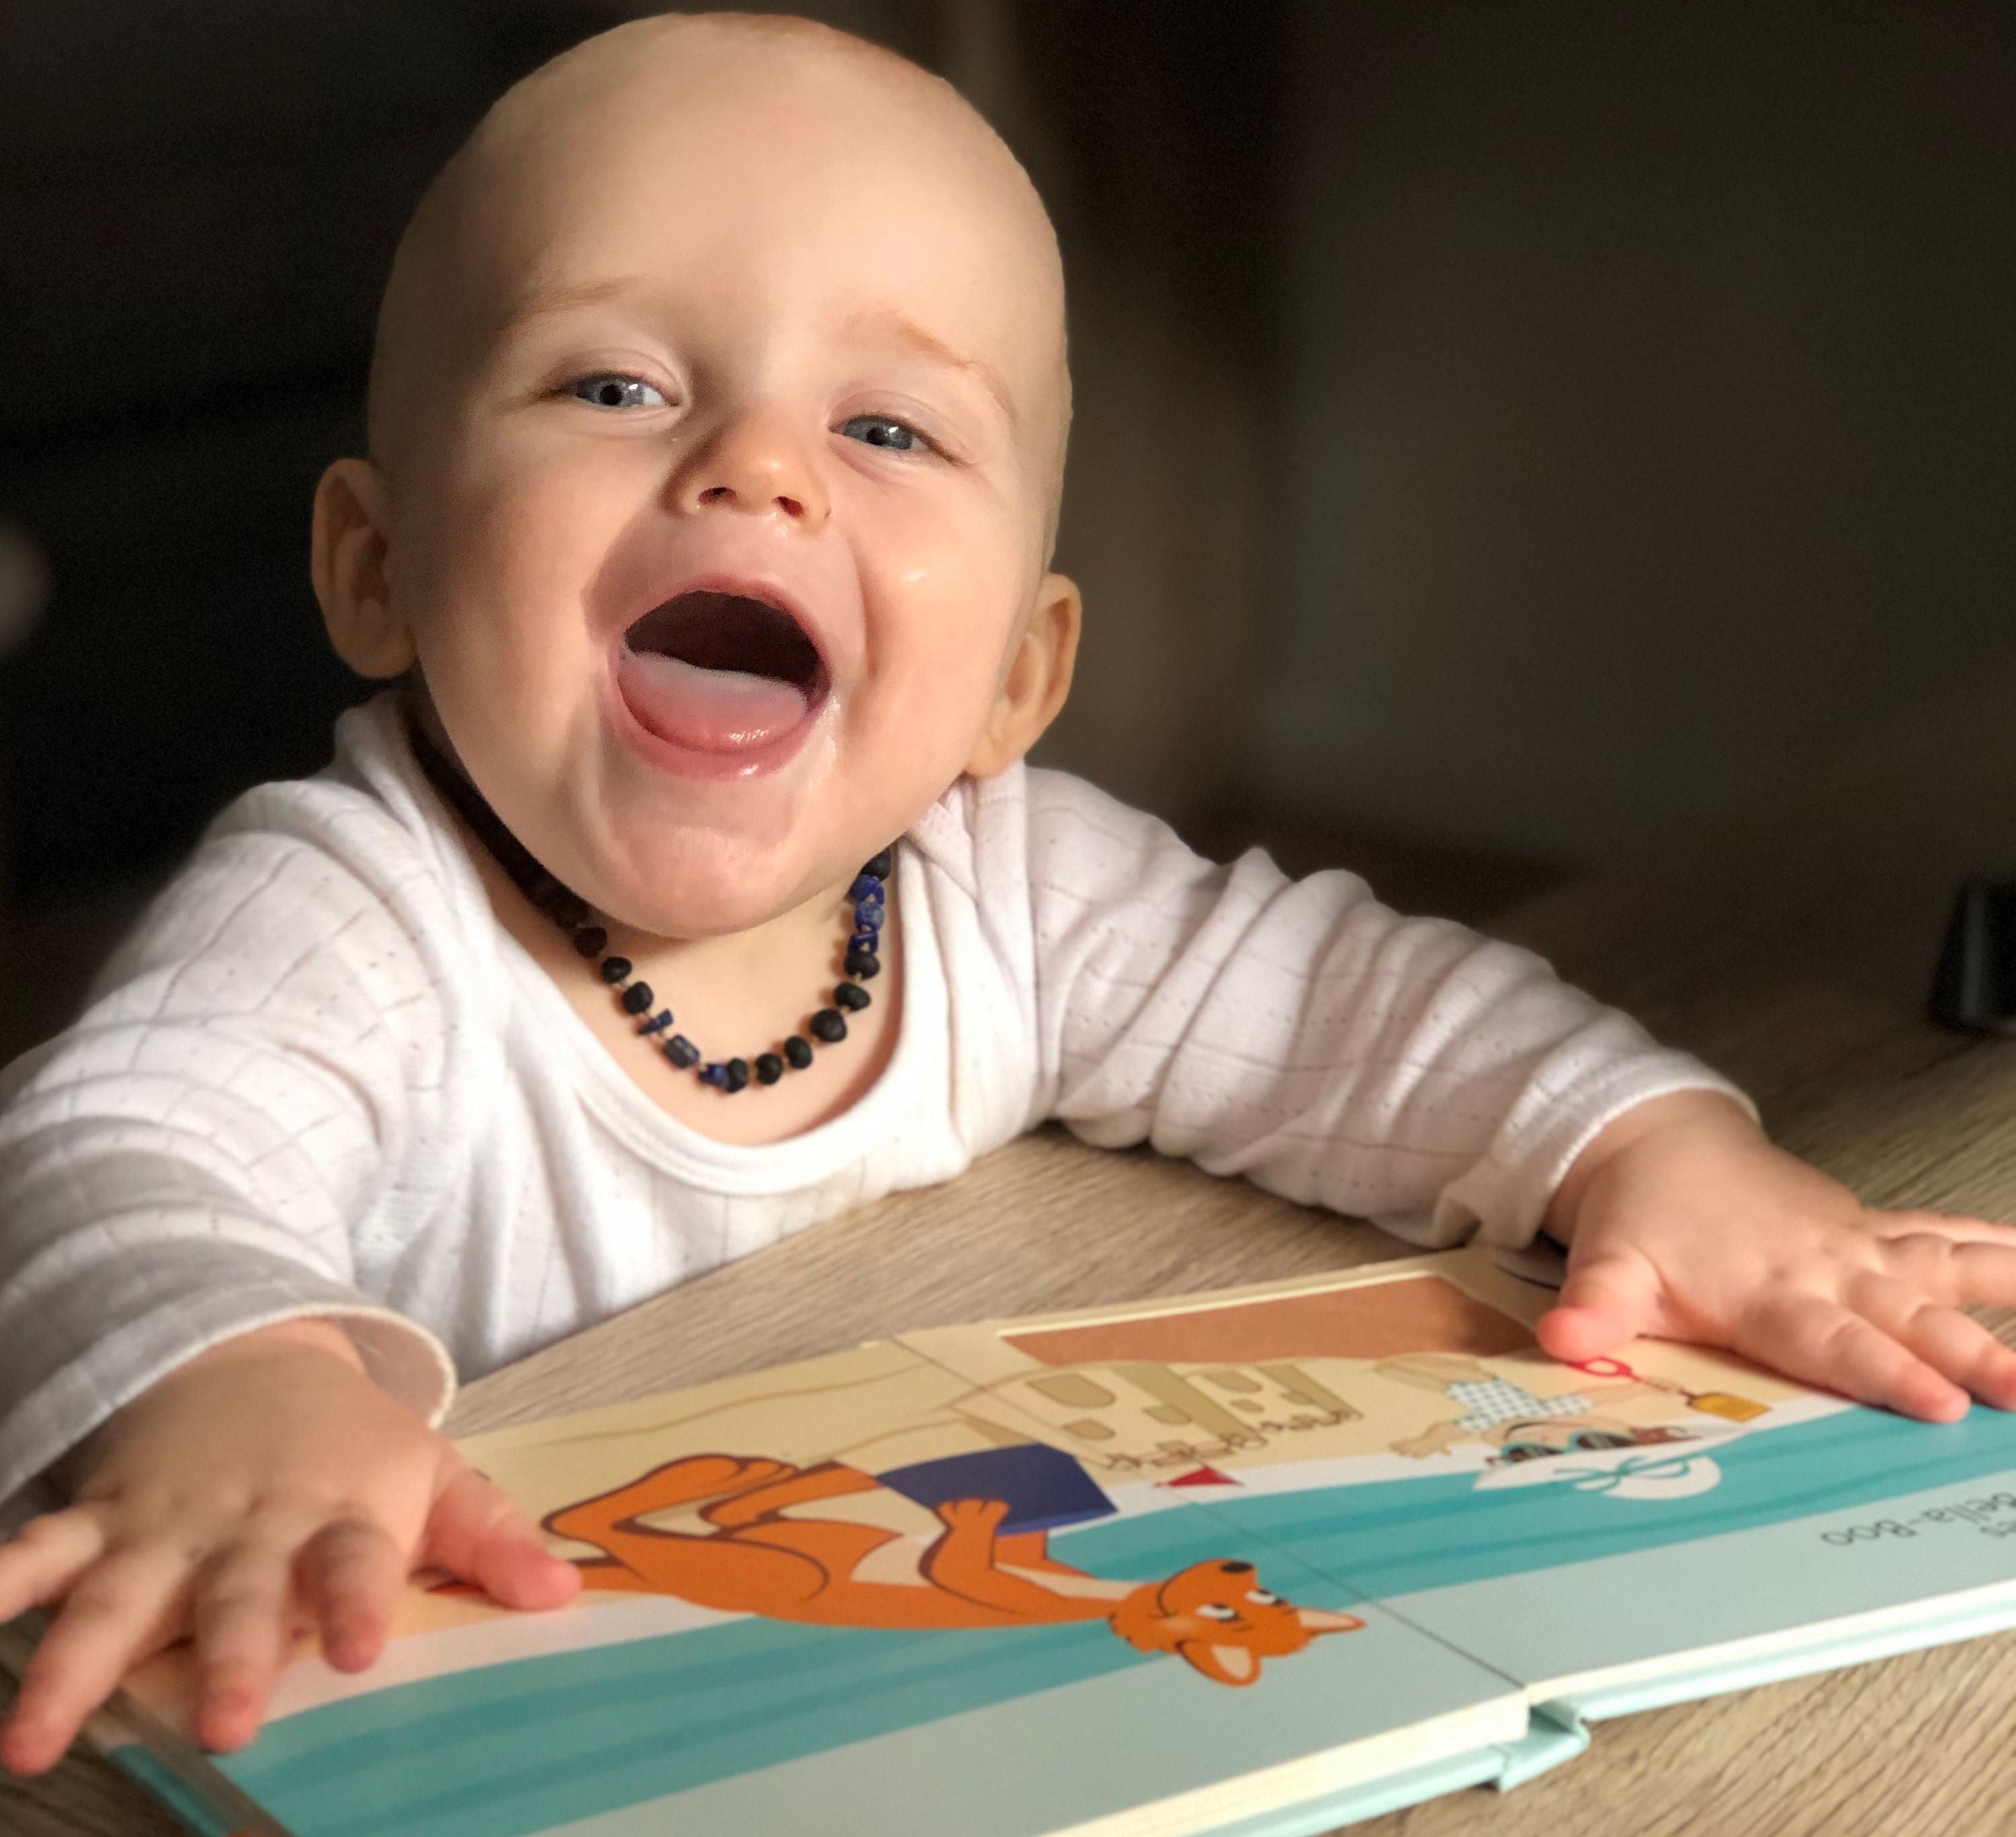 Baby reading a book. Baby open mouth